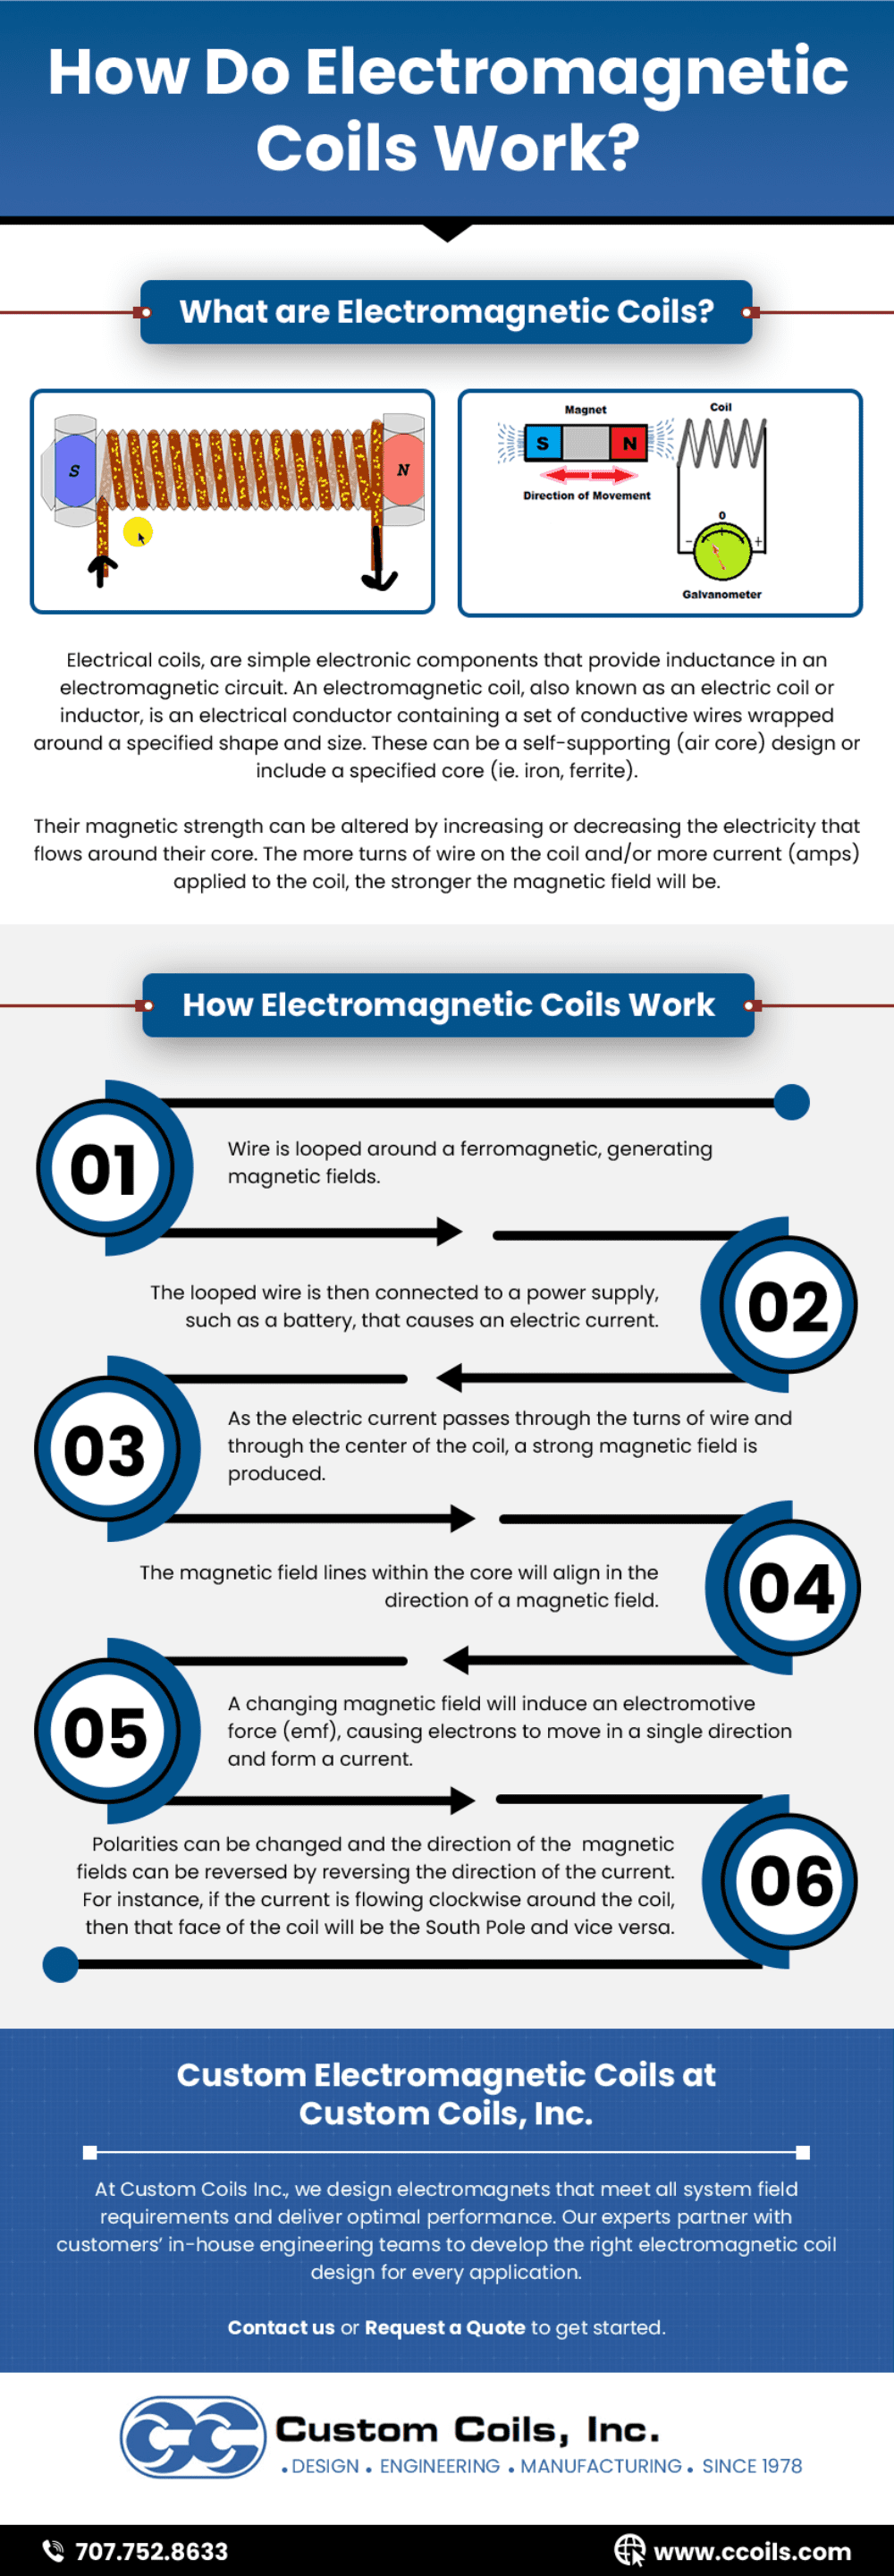 How Do Electromagnetic Coils Work